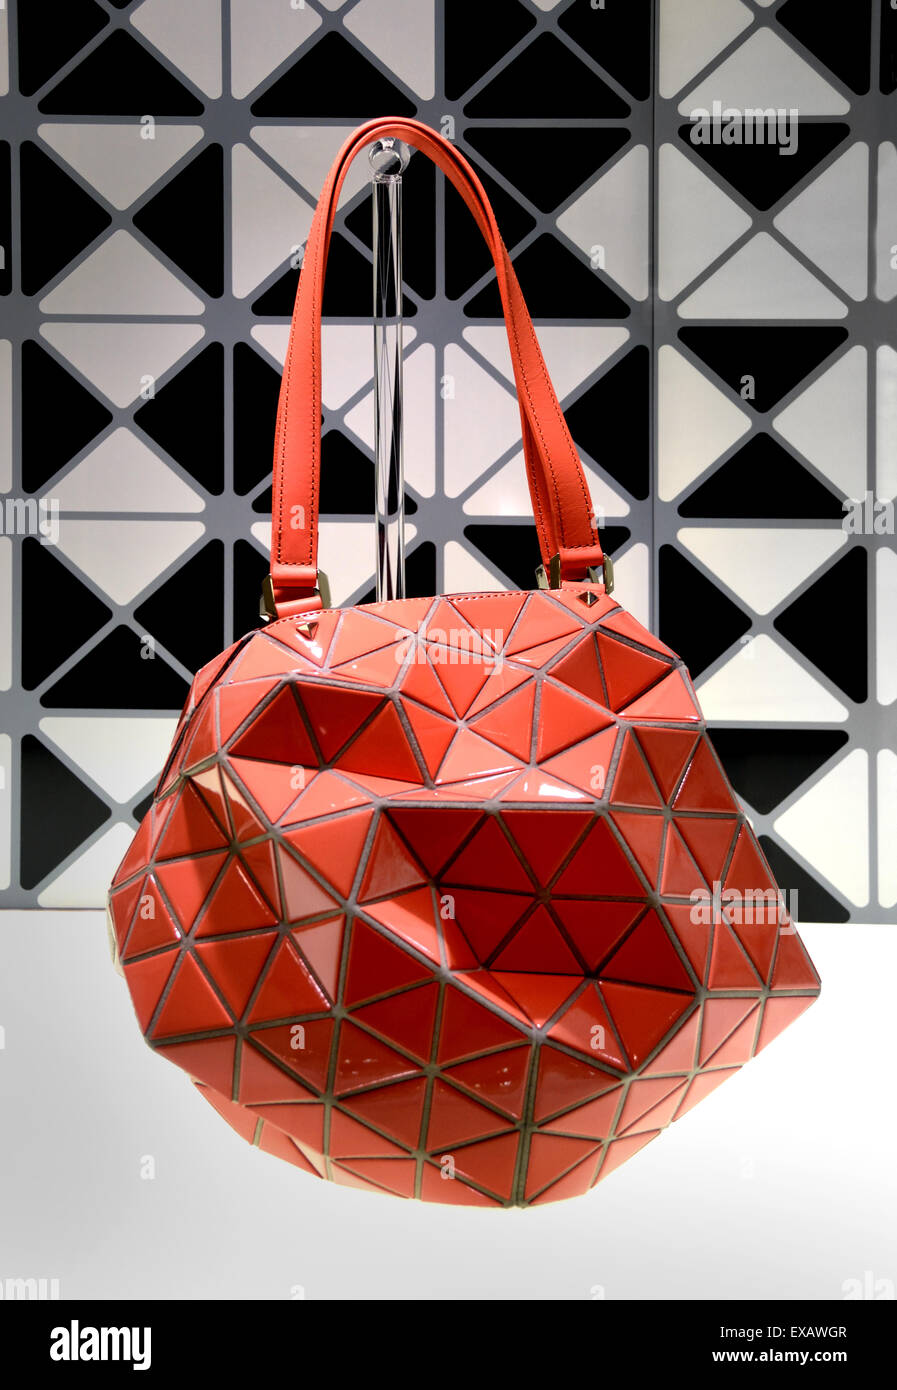 BAO BAO ISSEY MIYAKE ( Japanese fashion designer. He is known for his ...